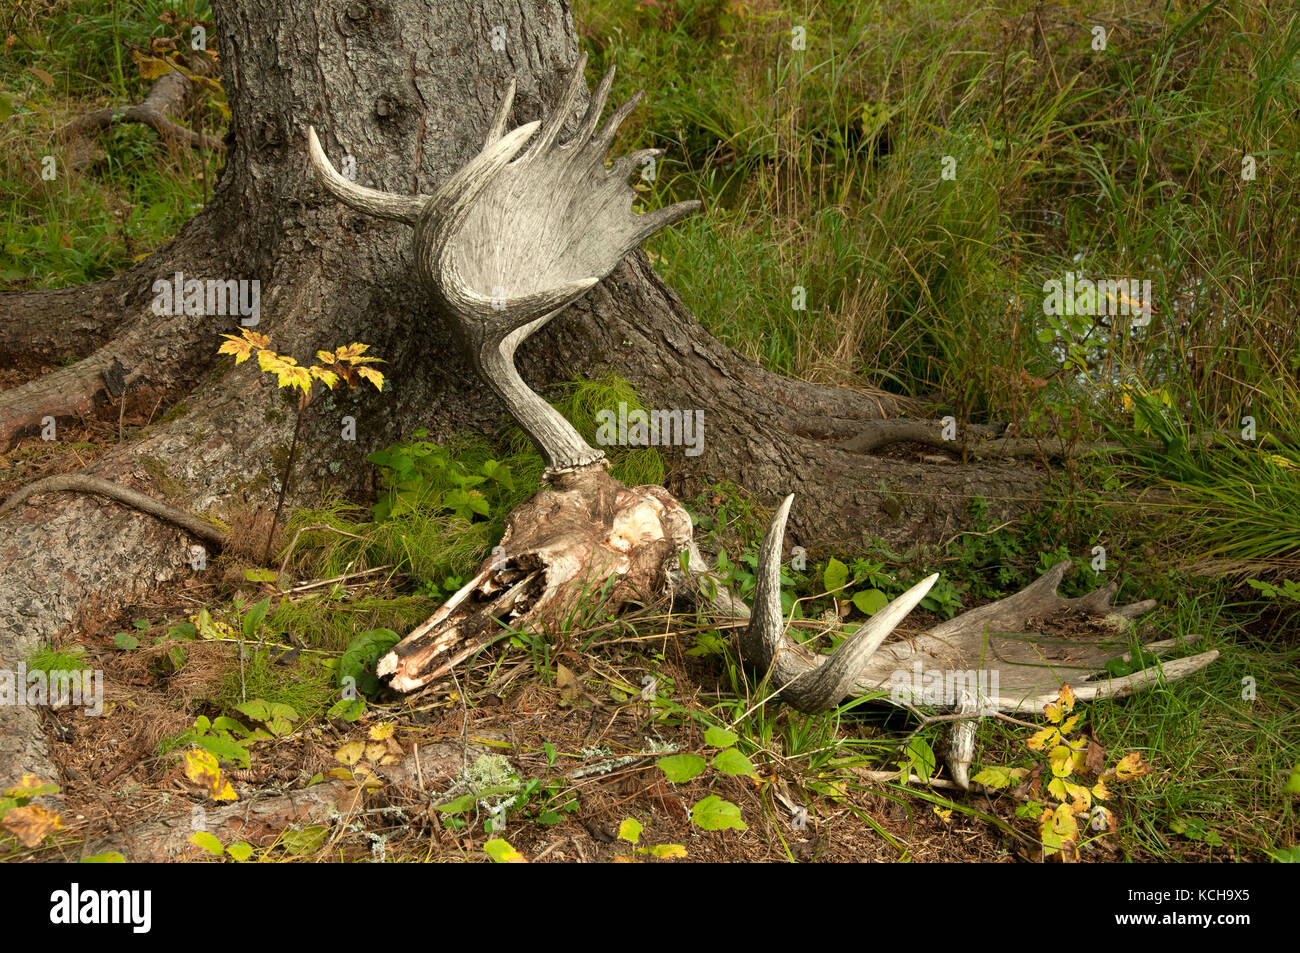 Moose Skull laying on boreal forest floor near Lake Superior, Canada Stock Photo